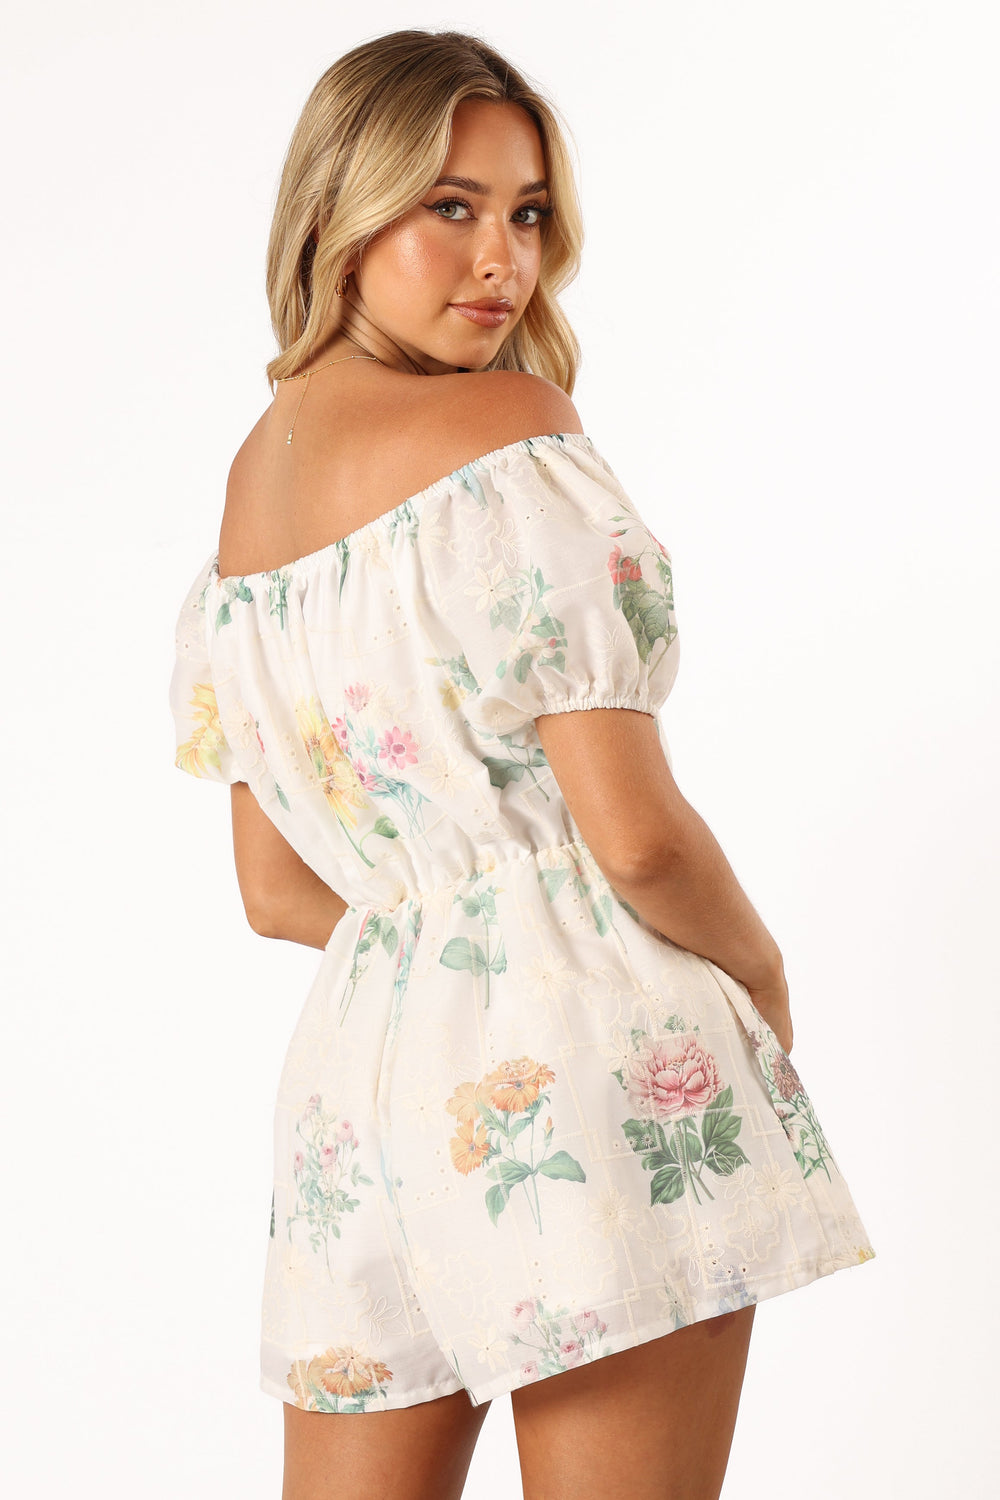 Petal and Pup USA Rompers Keleigh Off Shoulder Romper - White Floral